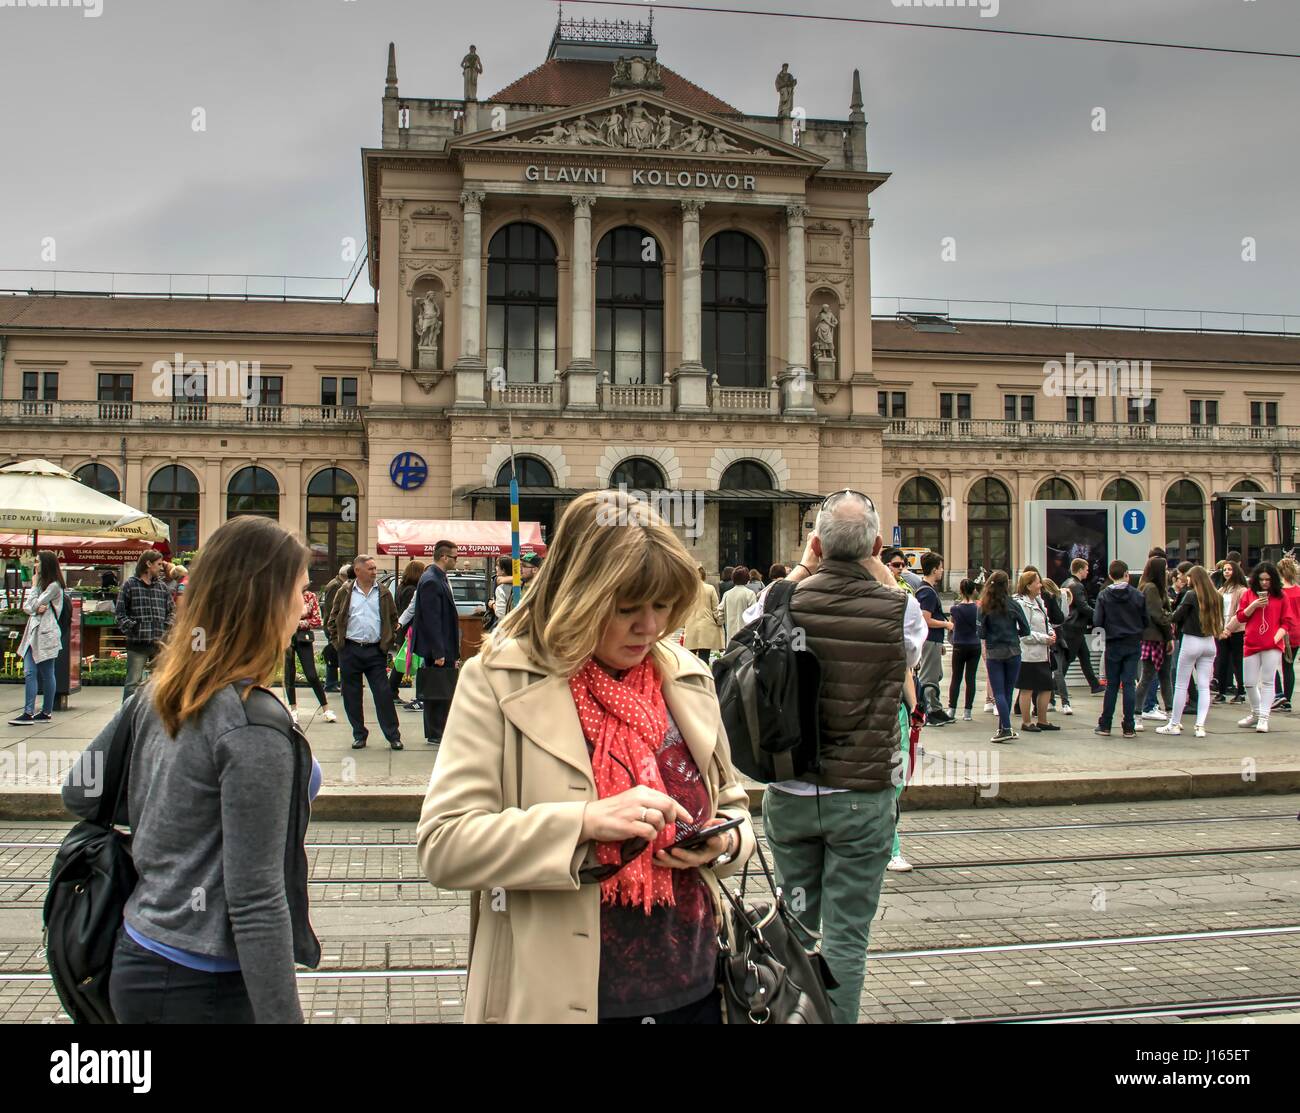 Zagreb, Croatia - Passengers and passers-by in front of the Main Railroad Station (Glavni Kolodvor) Stock Photo